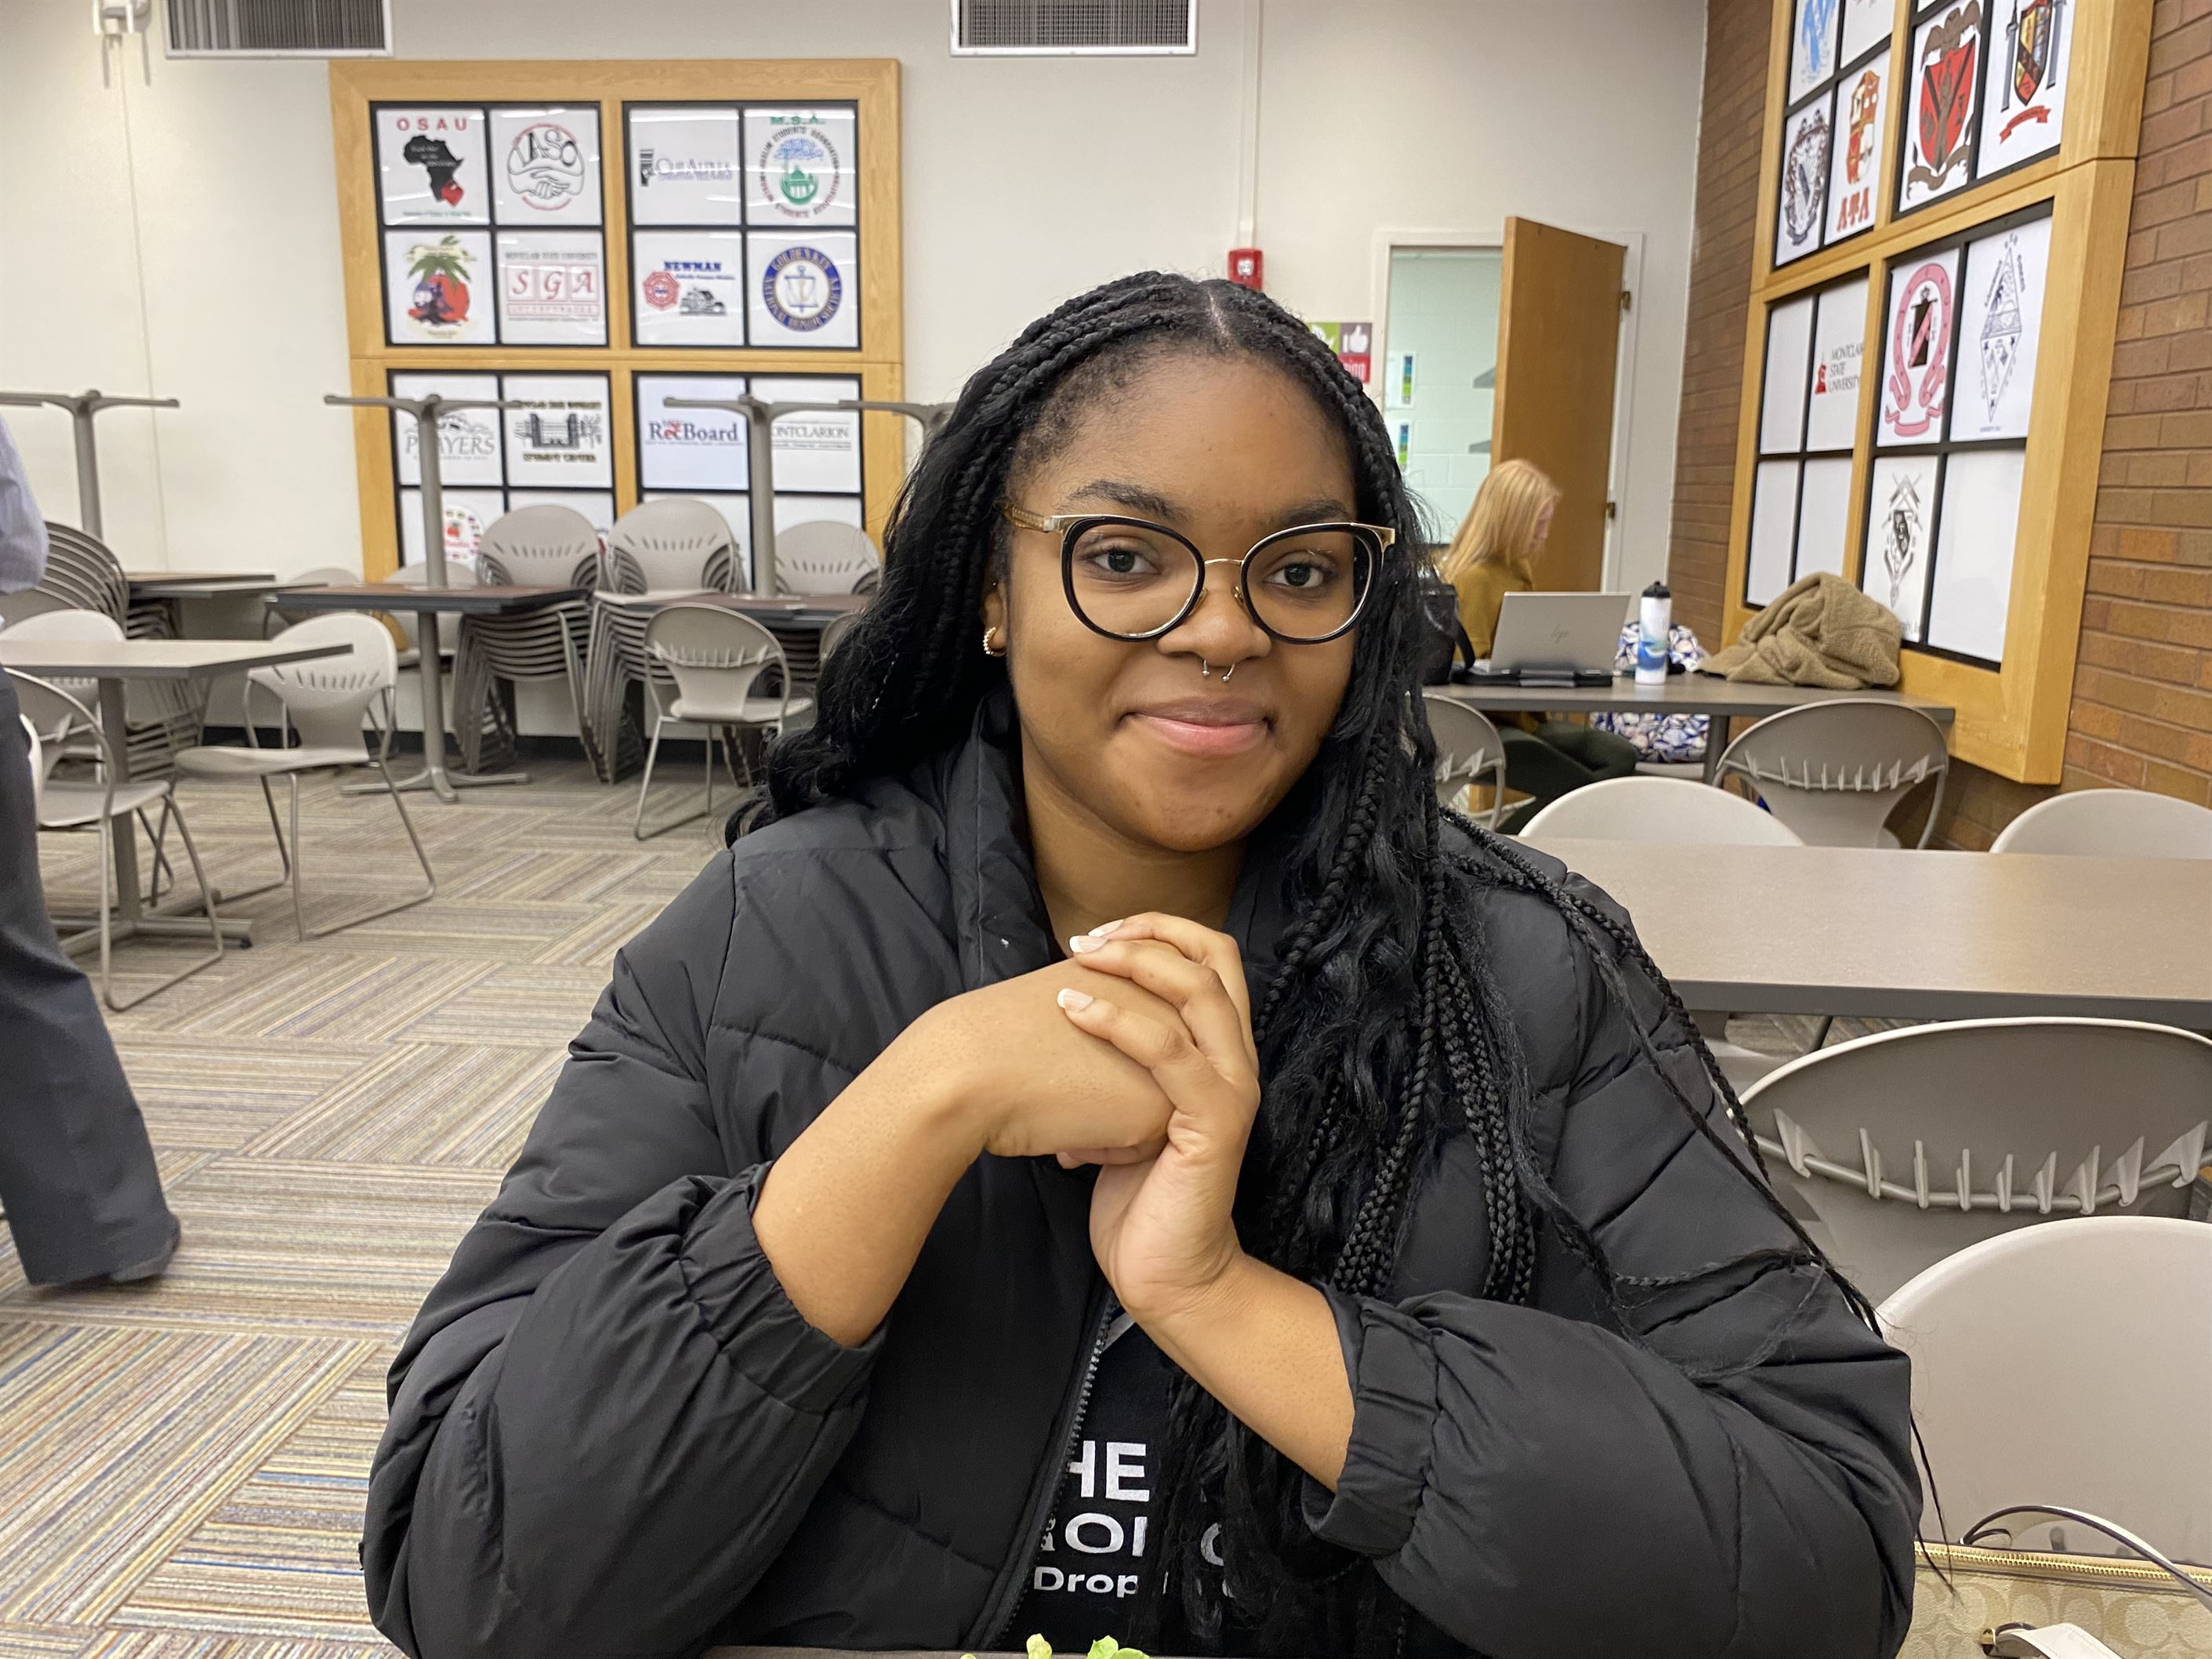 Chibuzor Ezeji, junior public health major, sees people have been getting sick recently and doesn't support the university not requiring the shot The Montclarion| Erin Lawlor